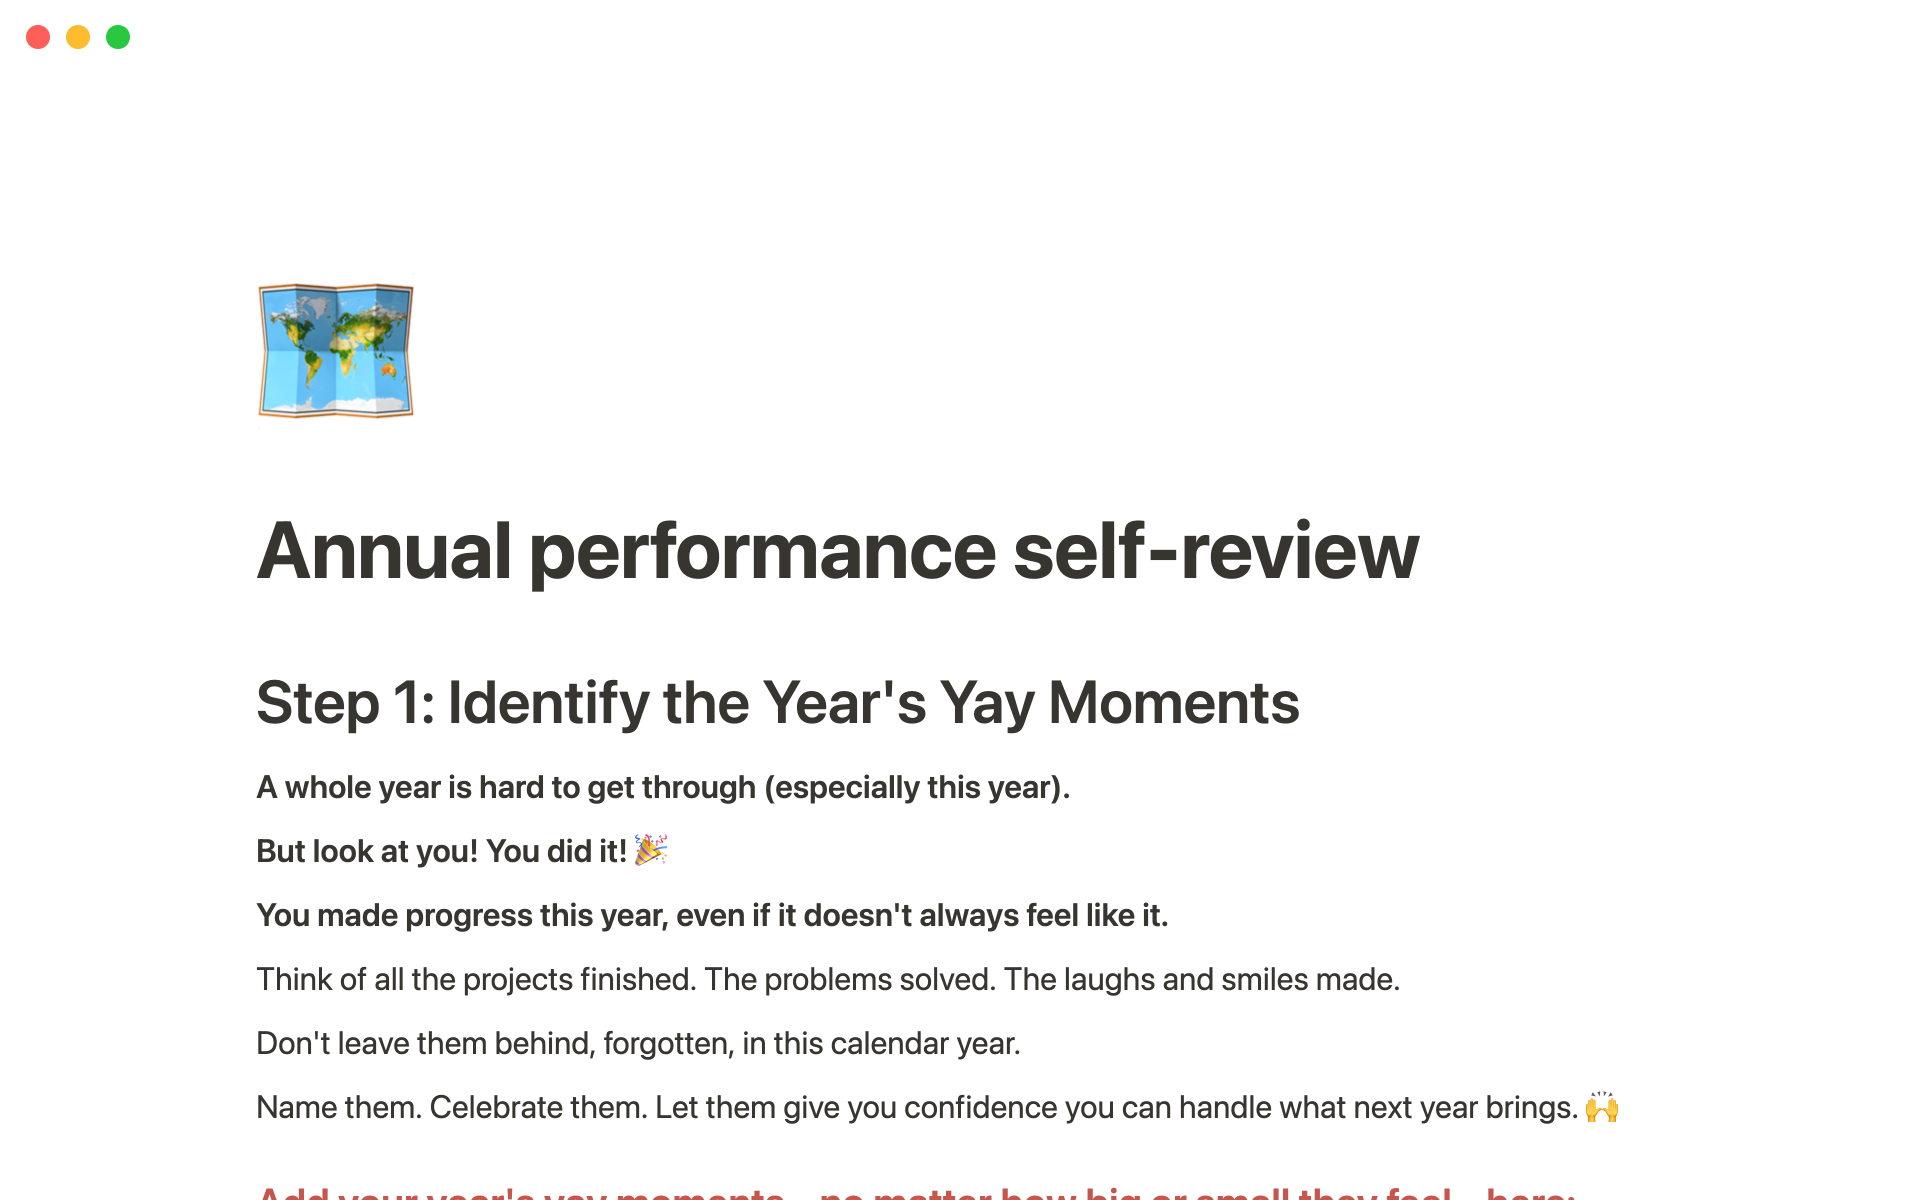 The desktop image for the Annual performance self-review template